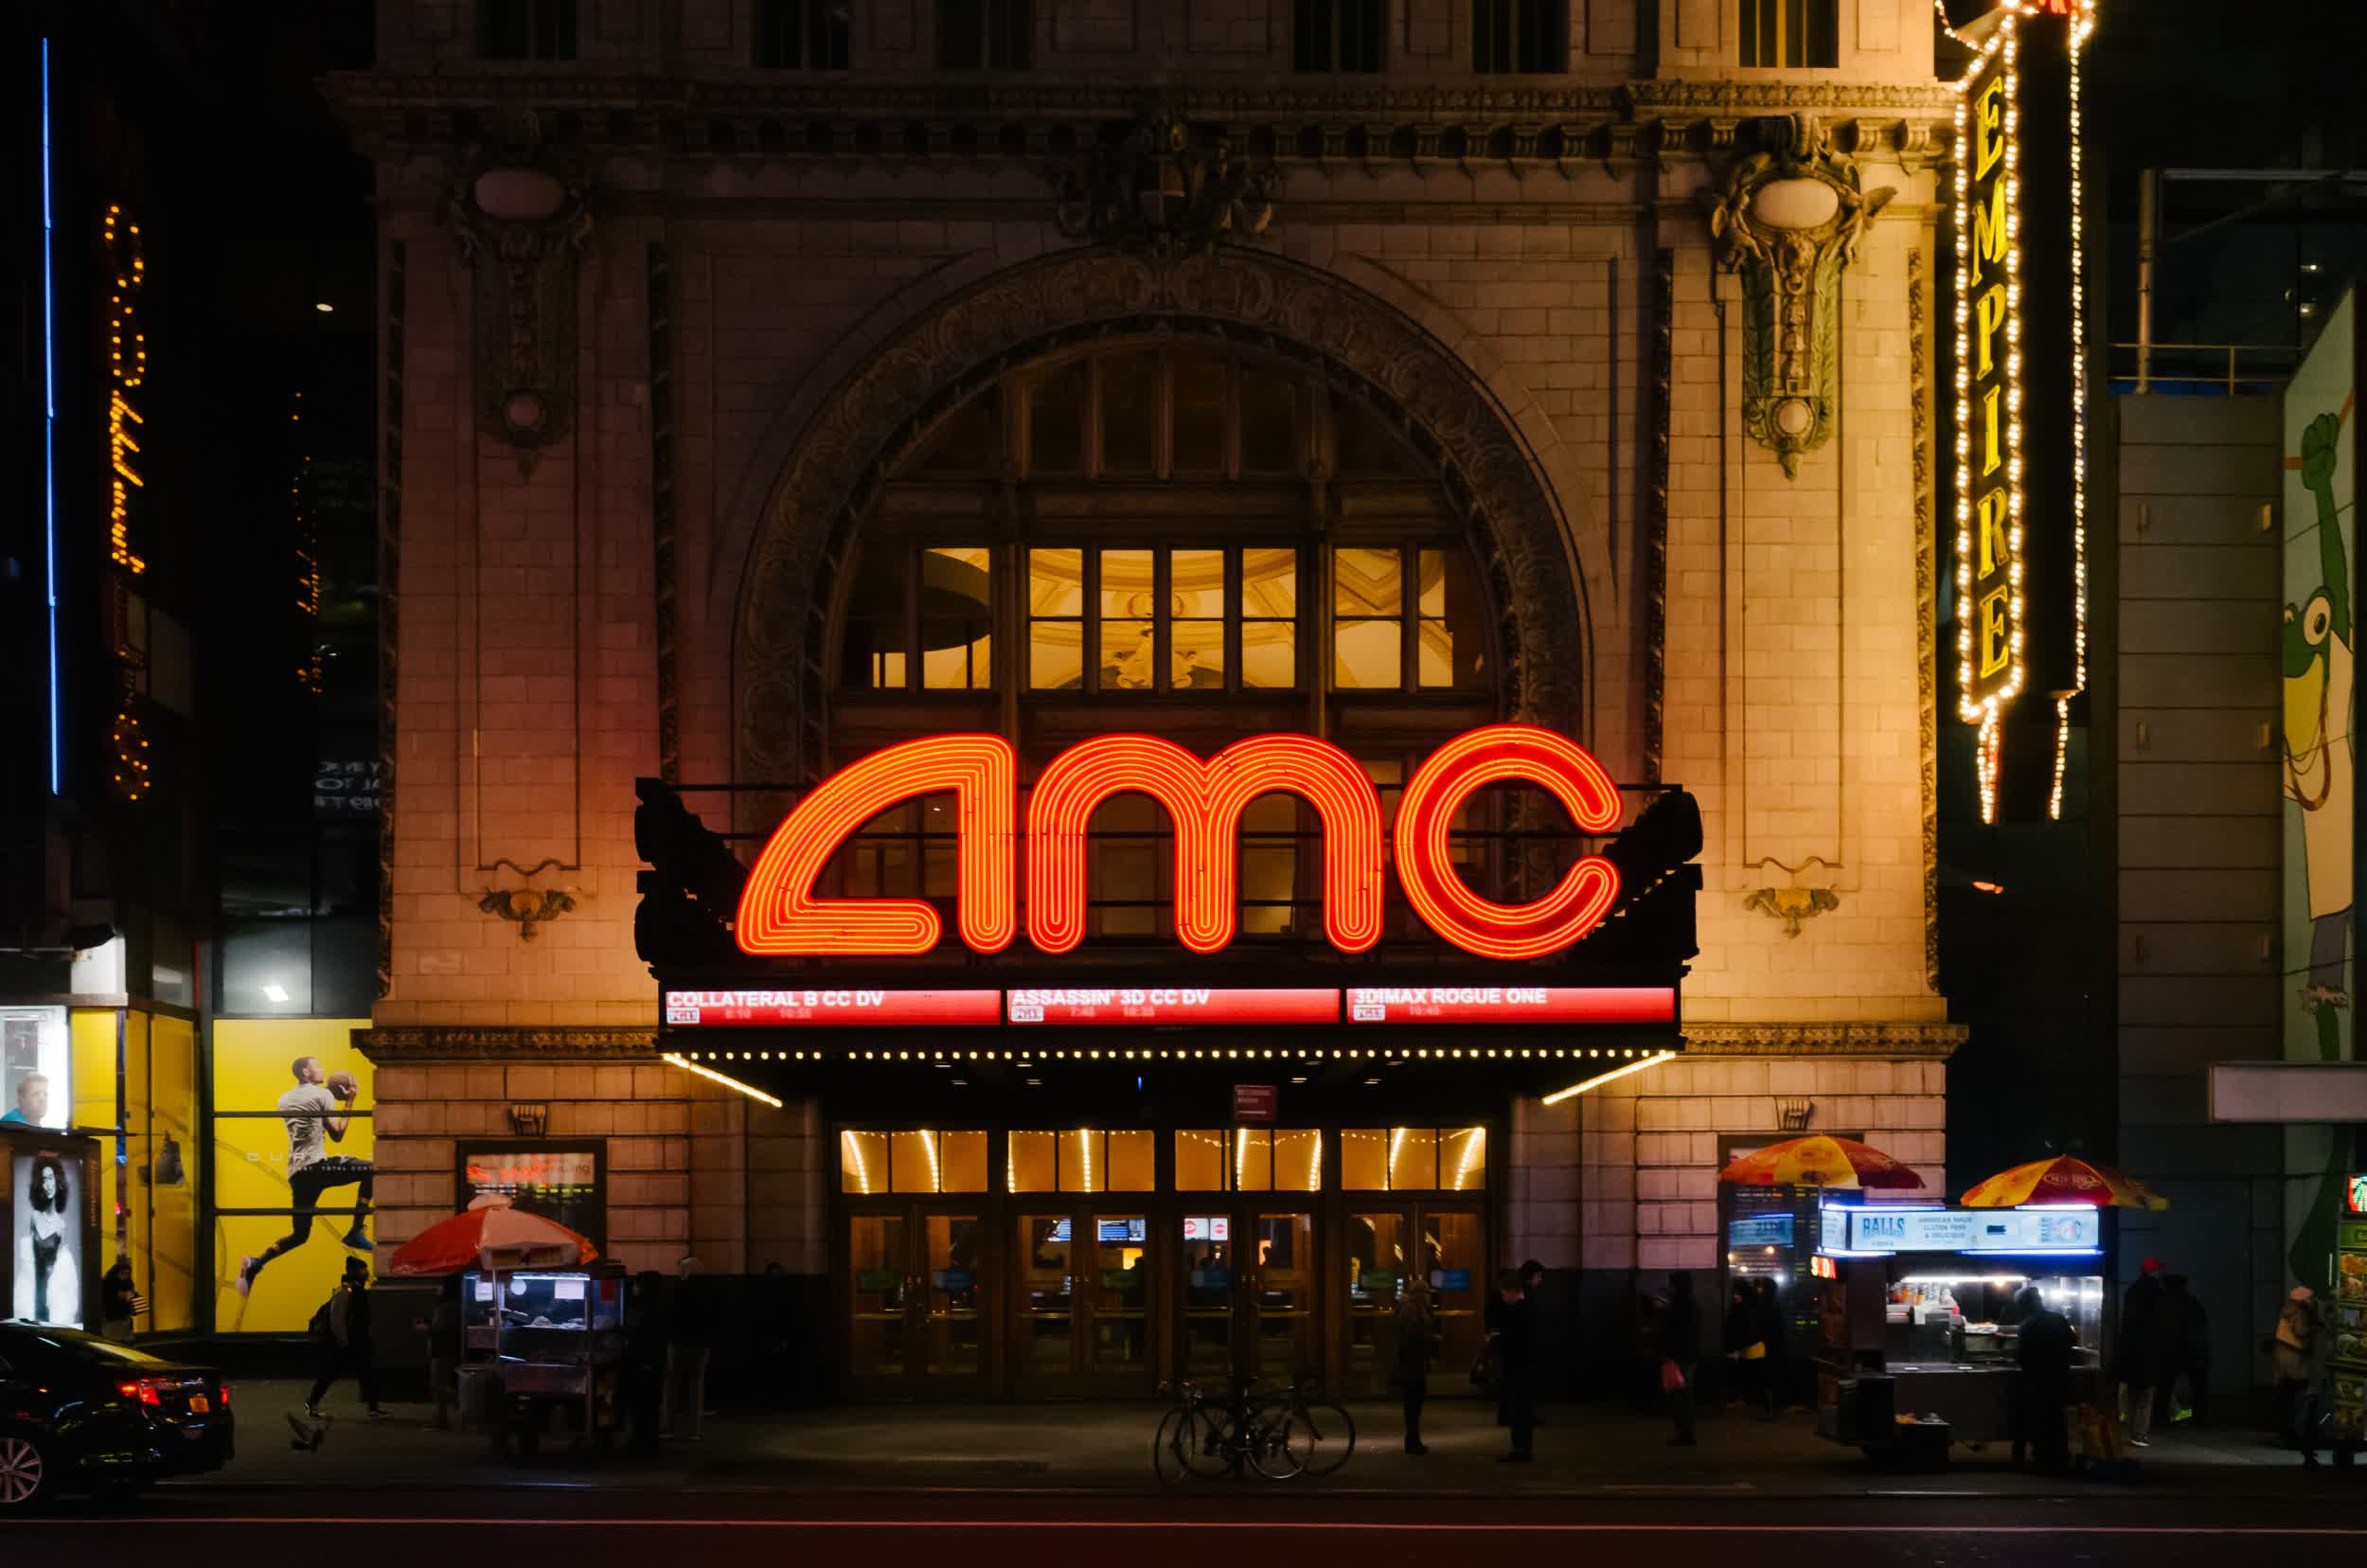 AMC hops on the private movie showing bandwagon with reasonable rates